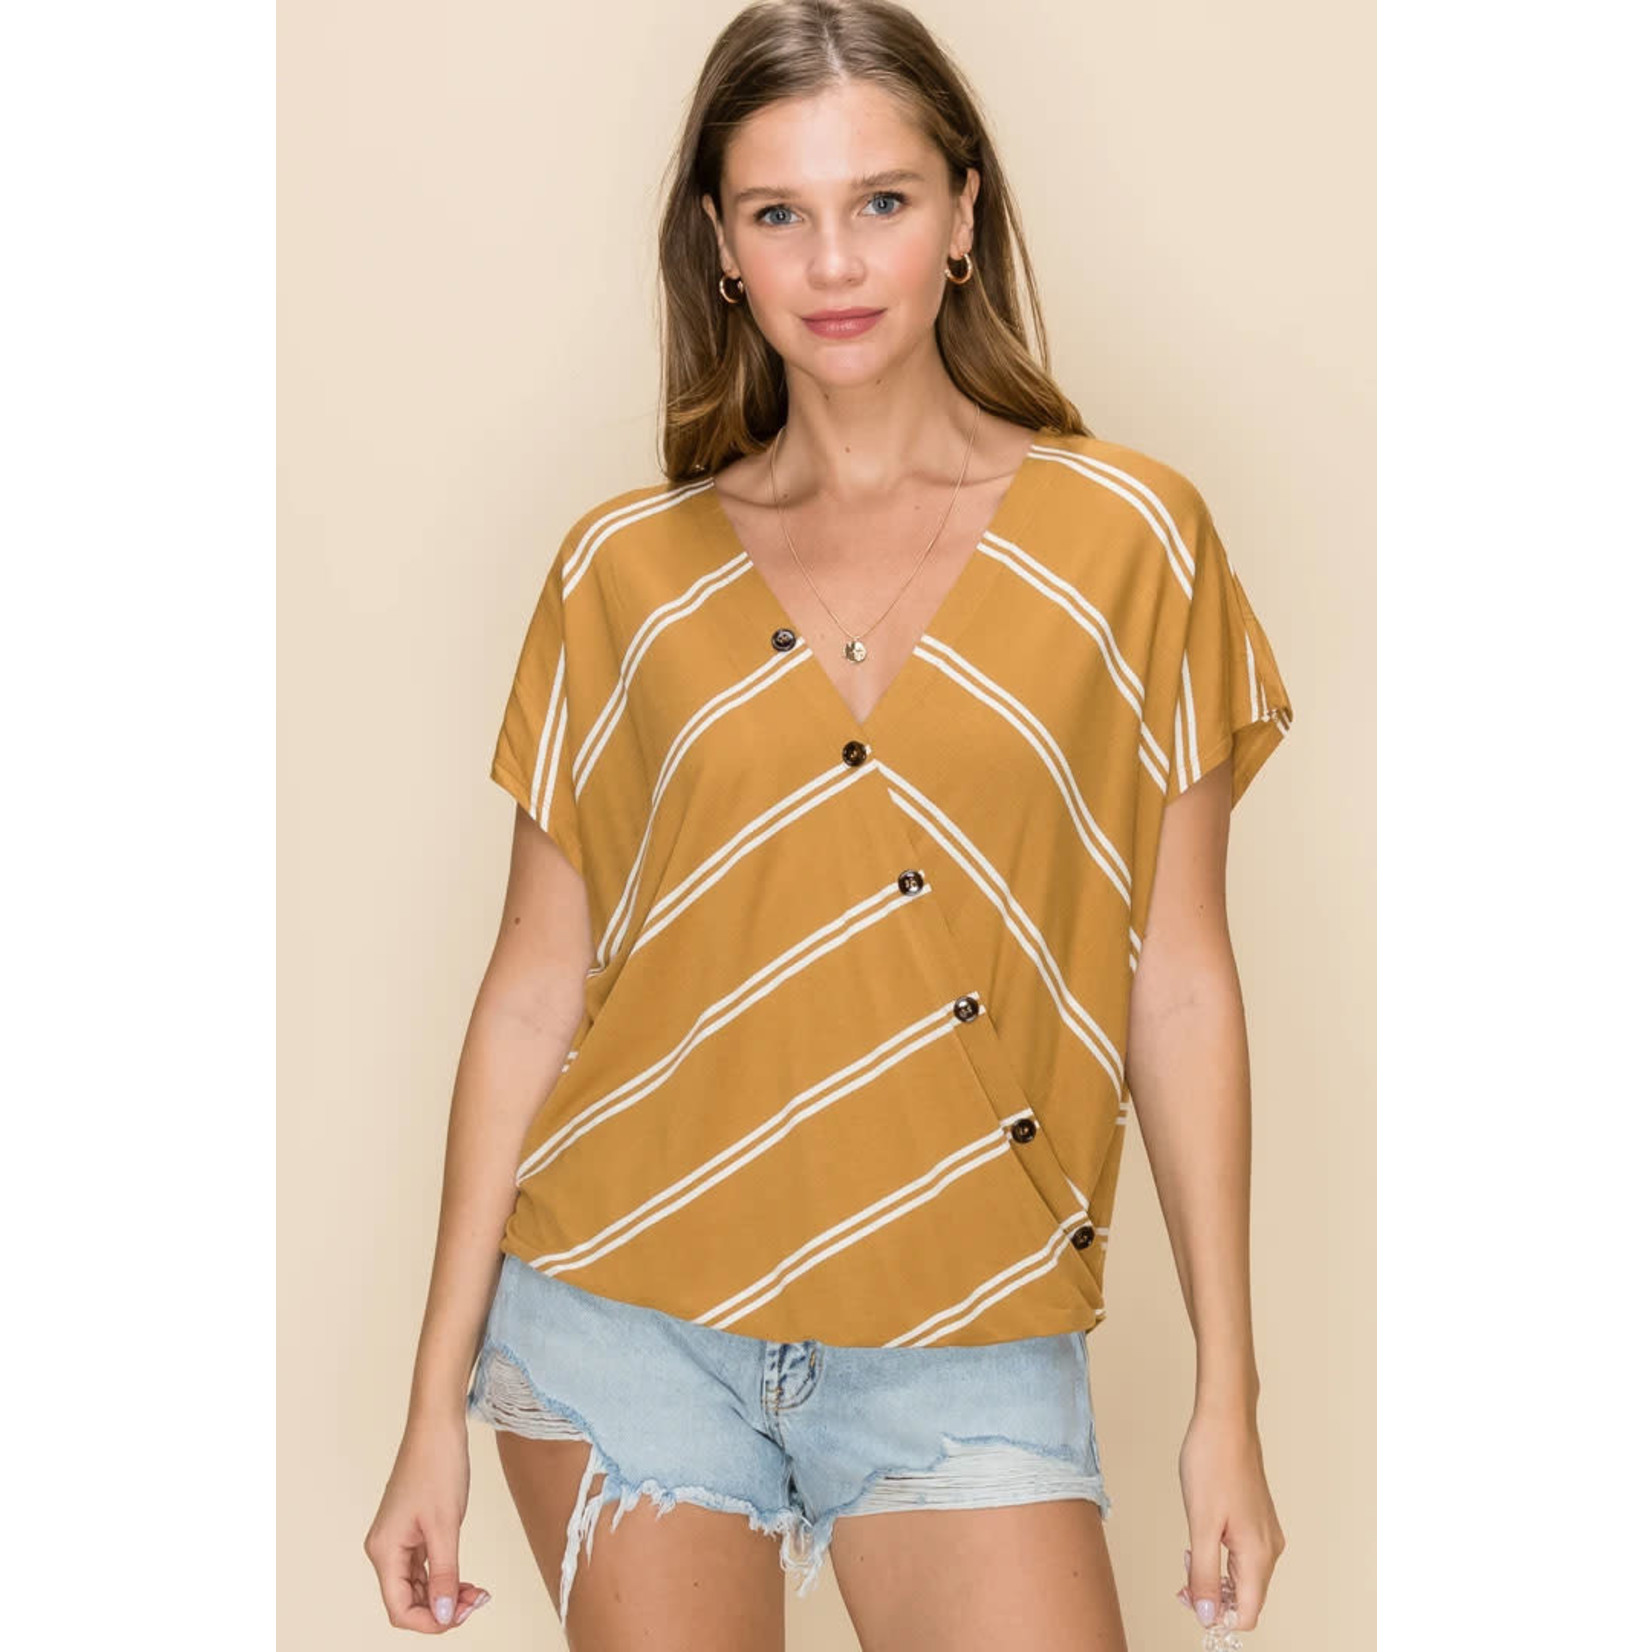 HYFVE Crossover V Neck with Horn Button Top